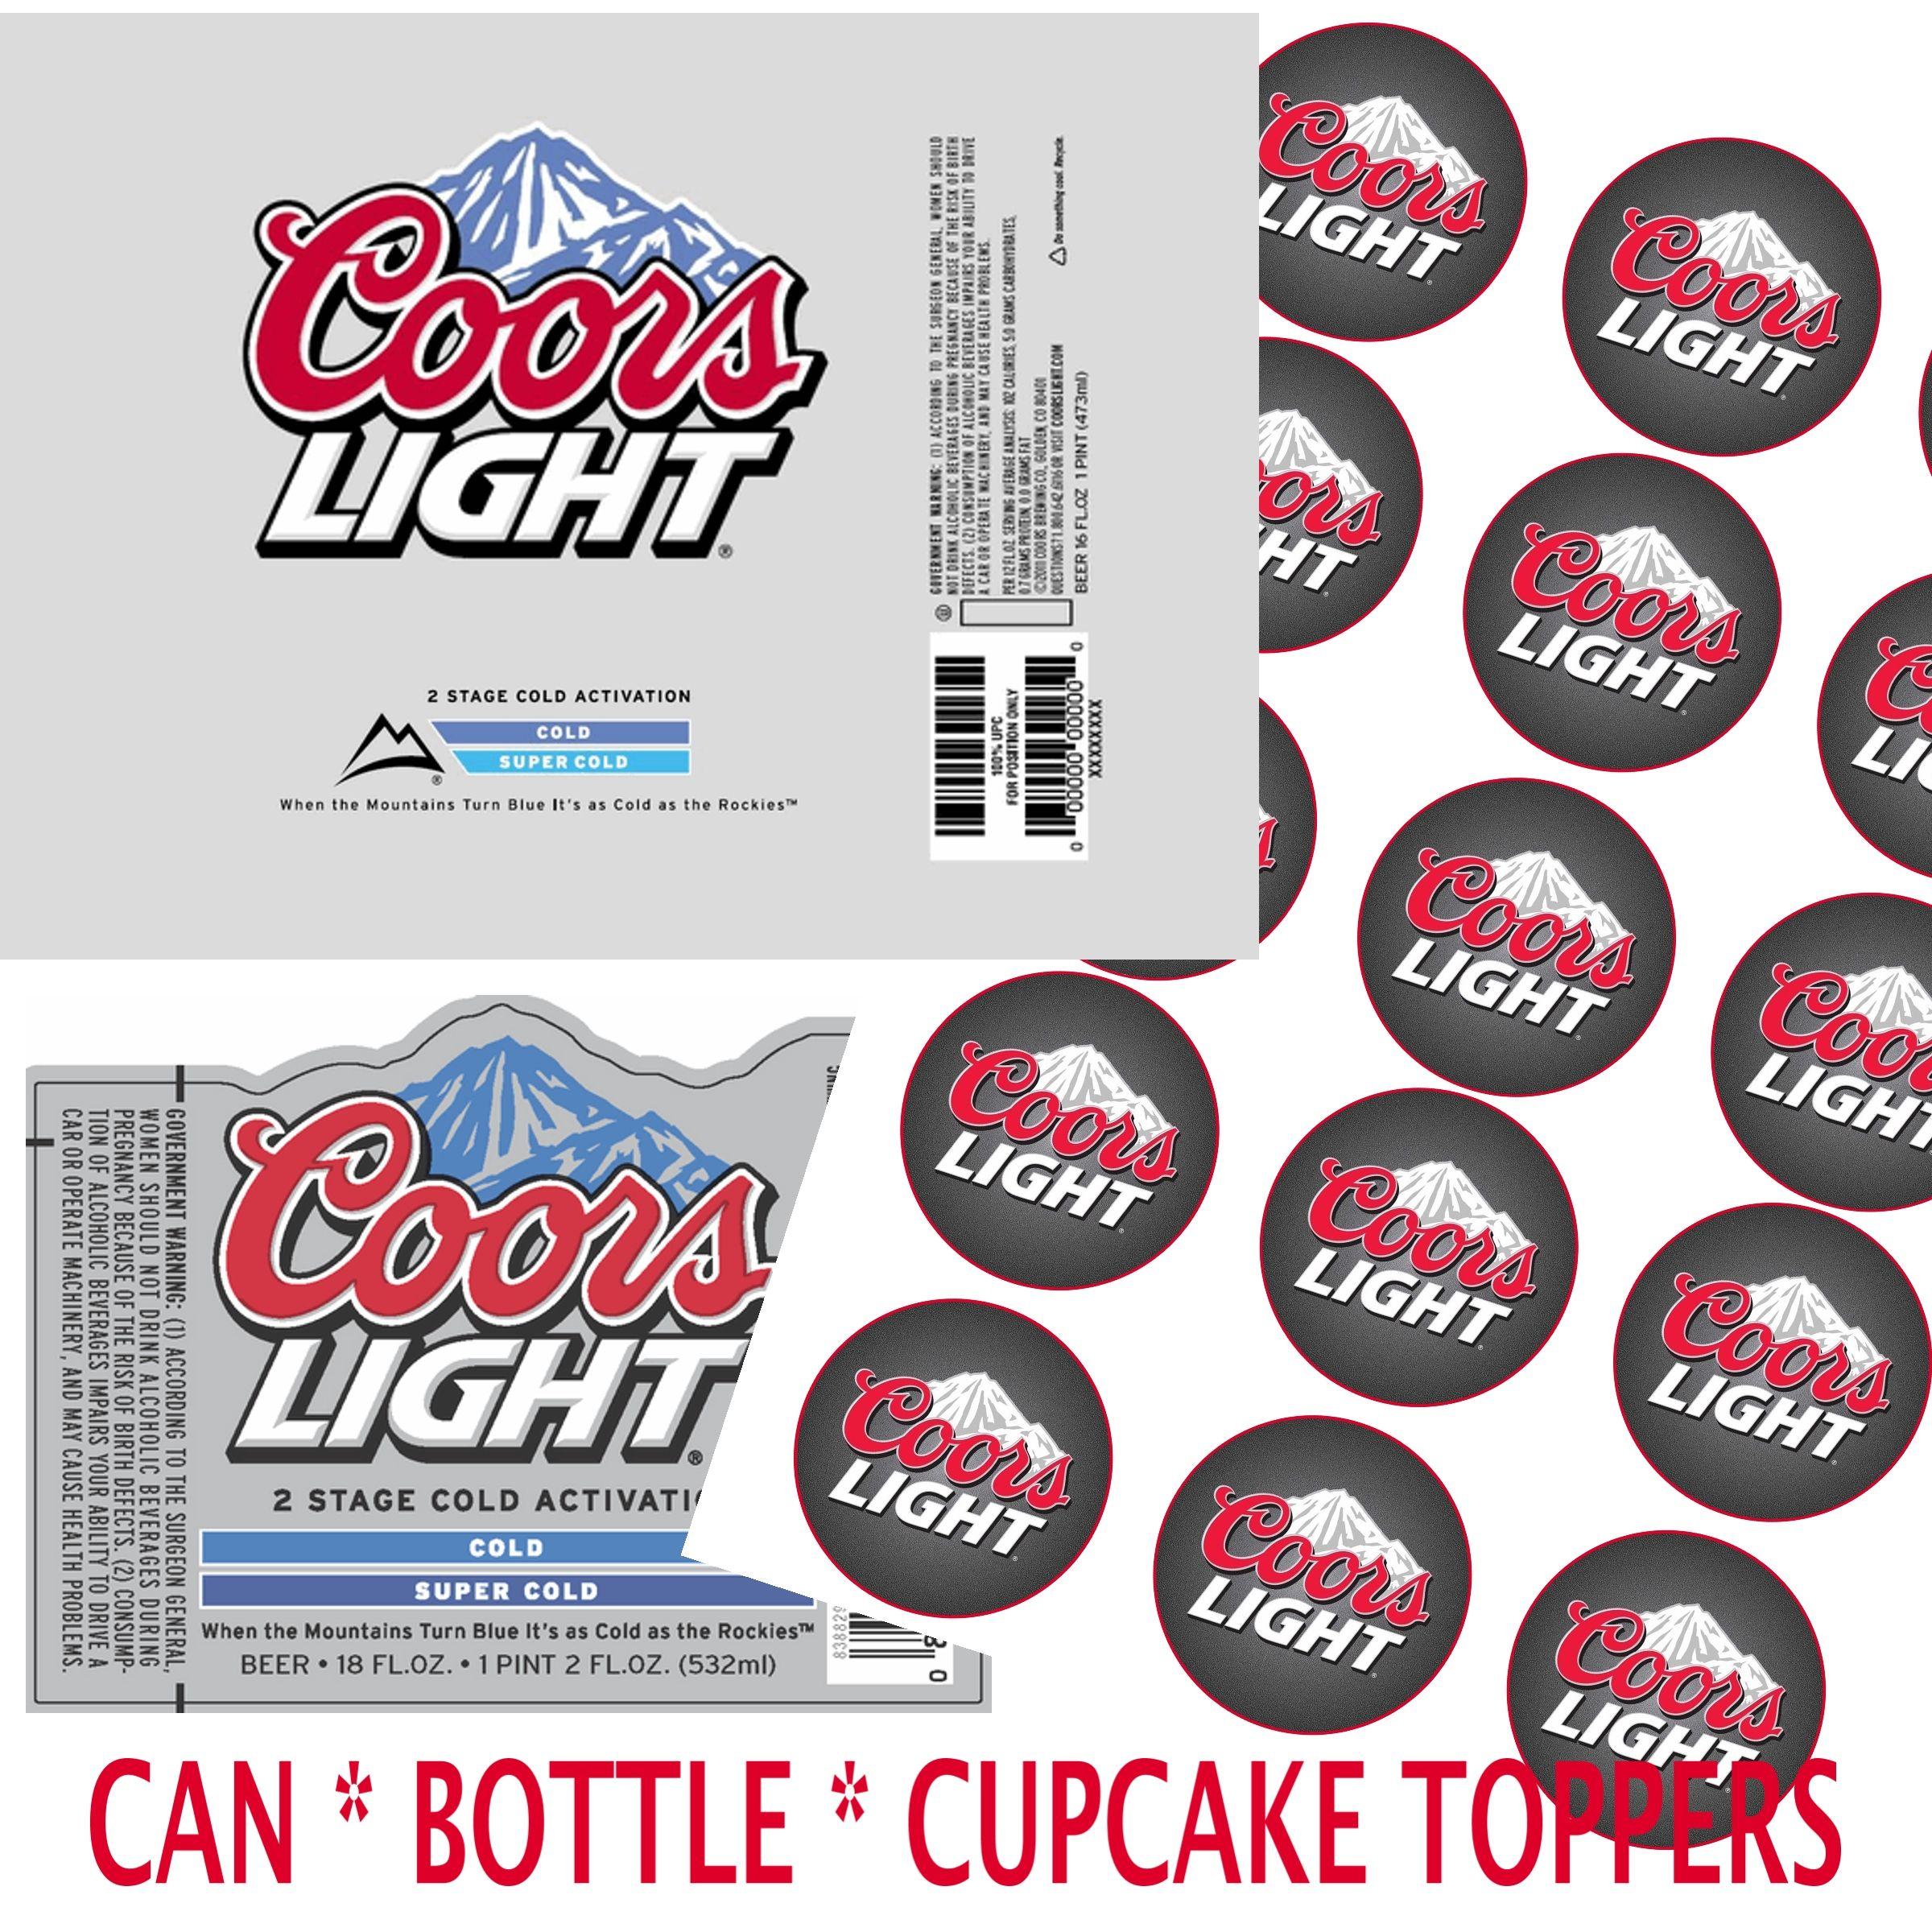 Coors Can Logo - Coors Light beer can/bottle labels and matching cupcake toppers